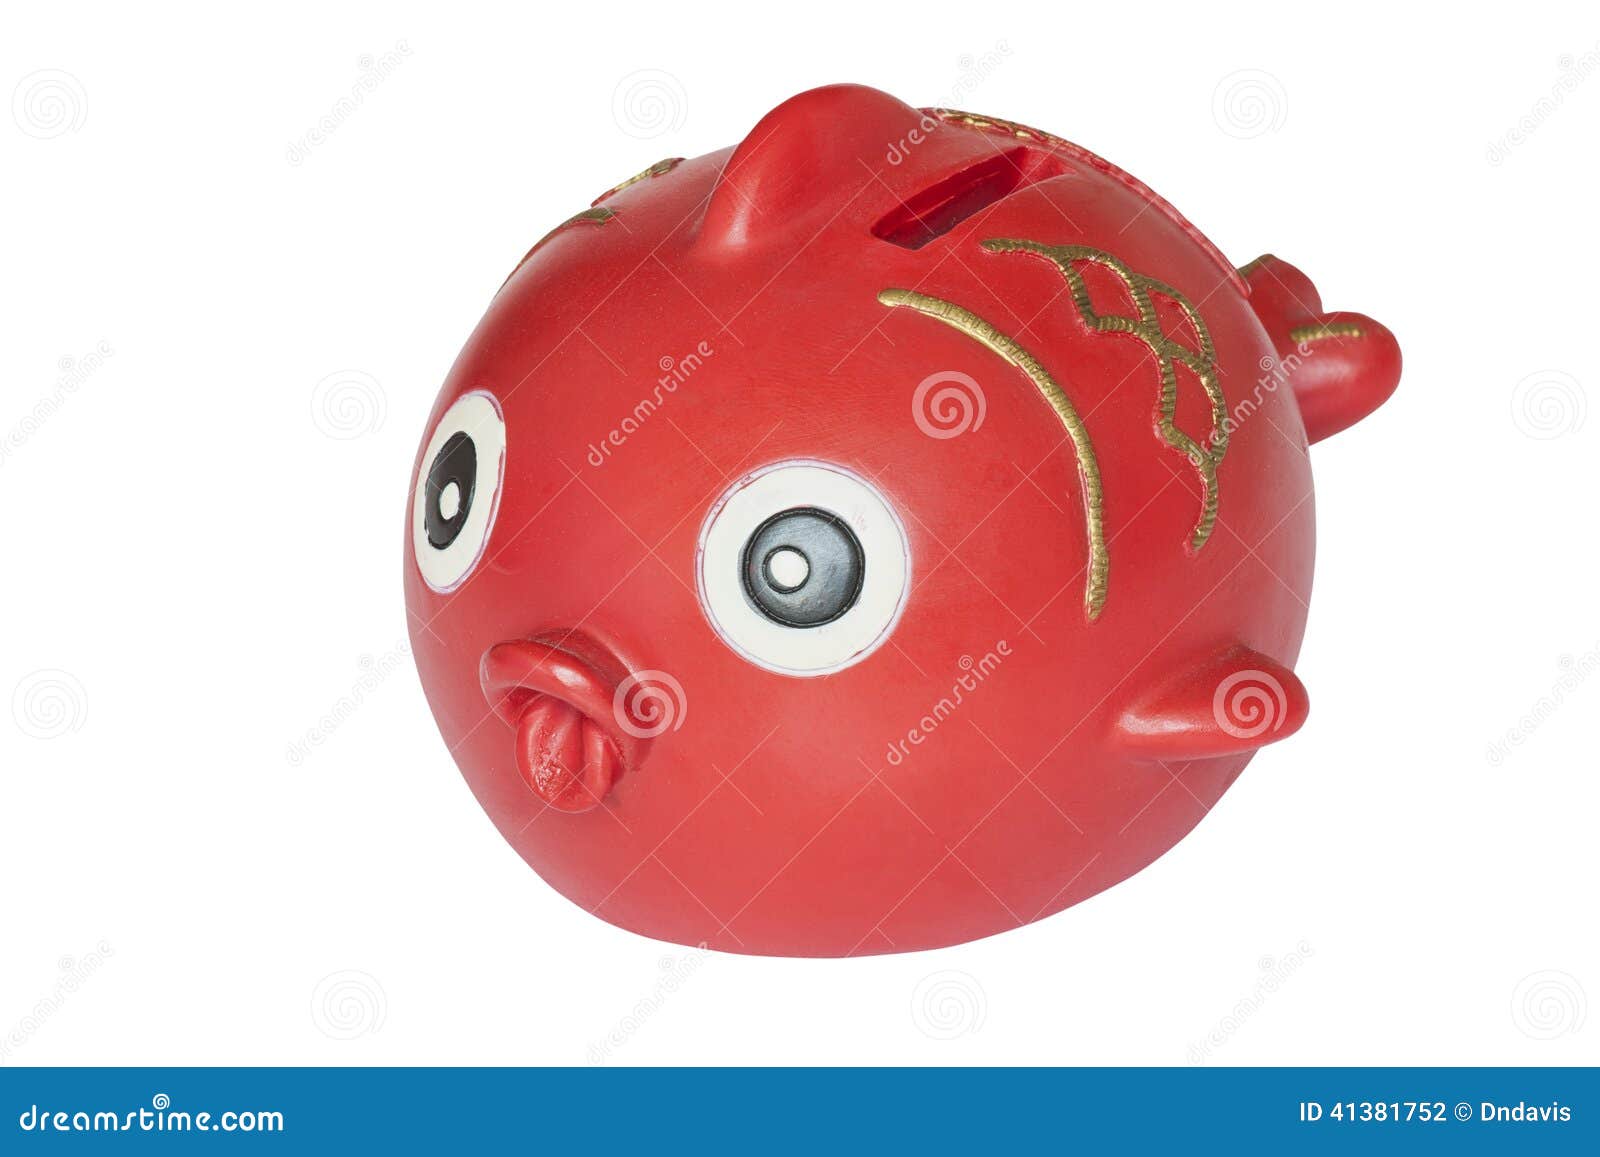 Cute Fish Bank Isolated on a White Background Stock Photo - Image